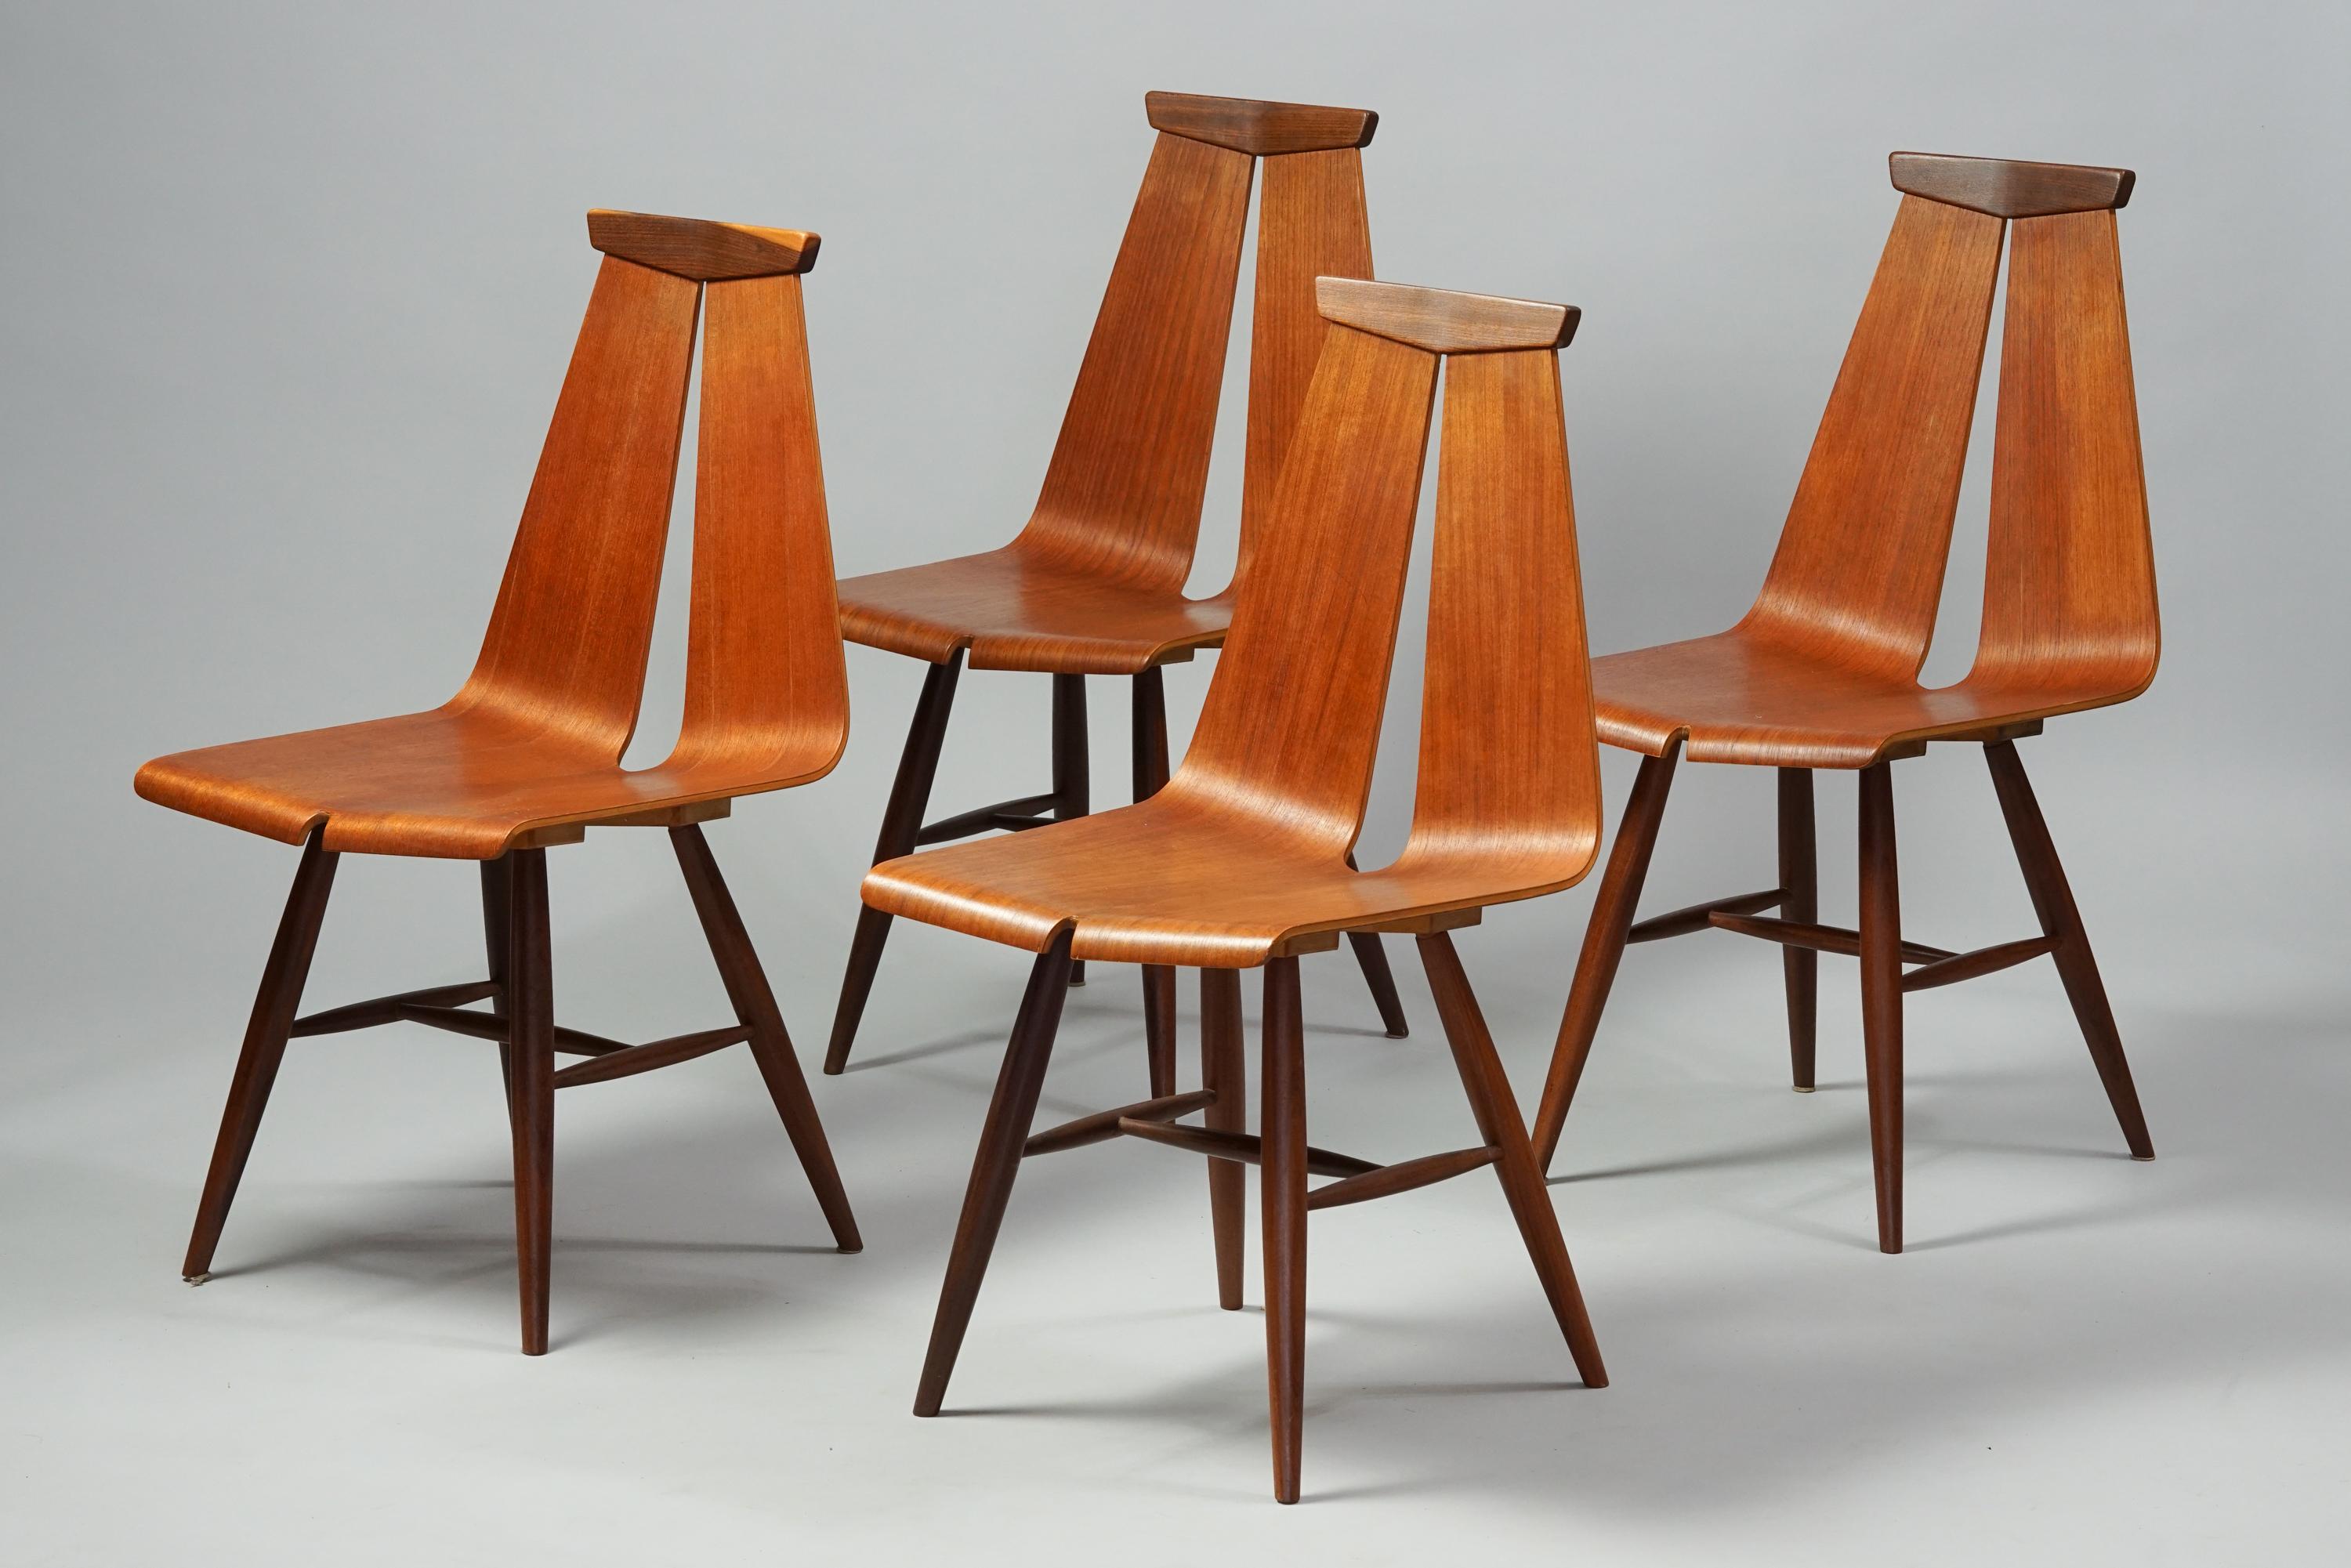 Set of four model 441 dining chairs by Risto Halme for Isku in the 1960s. Teak. Good vintage condition, minor wear consistent with age and use. The chairs are sold as a set. Iconic design.